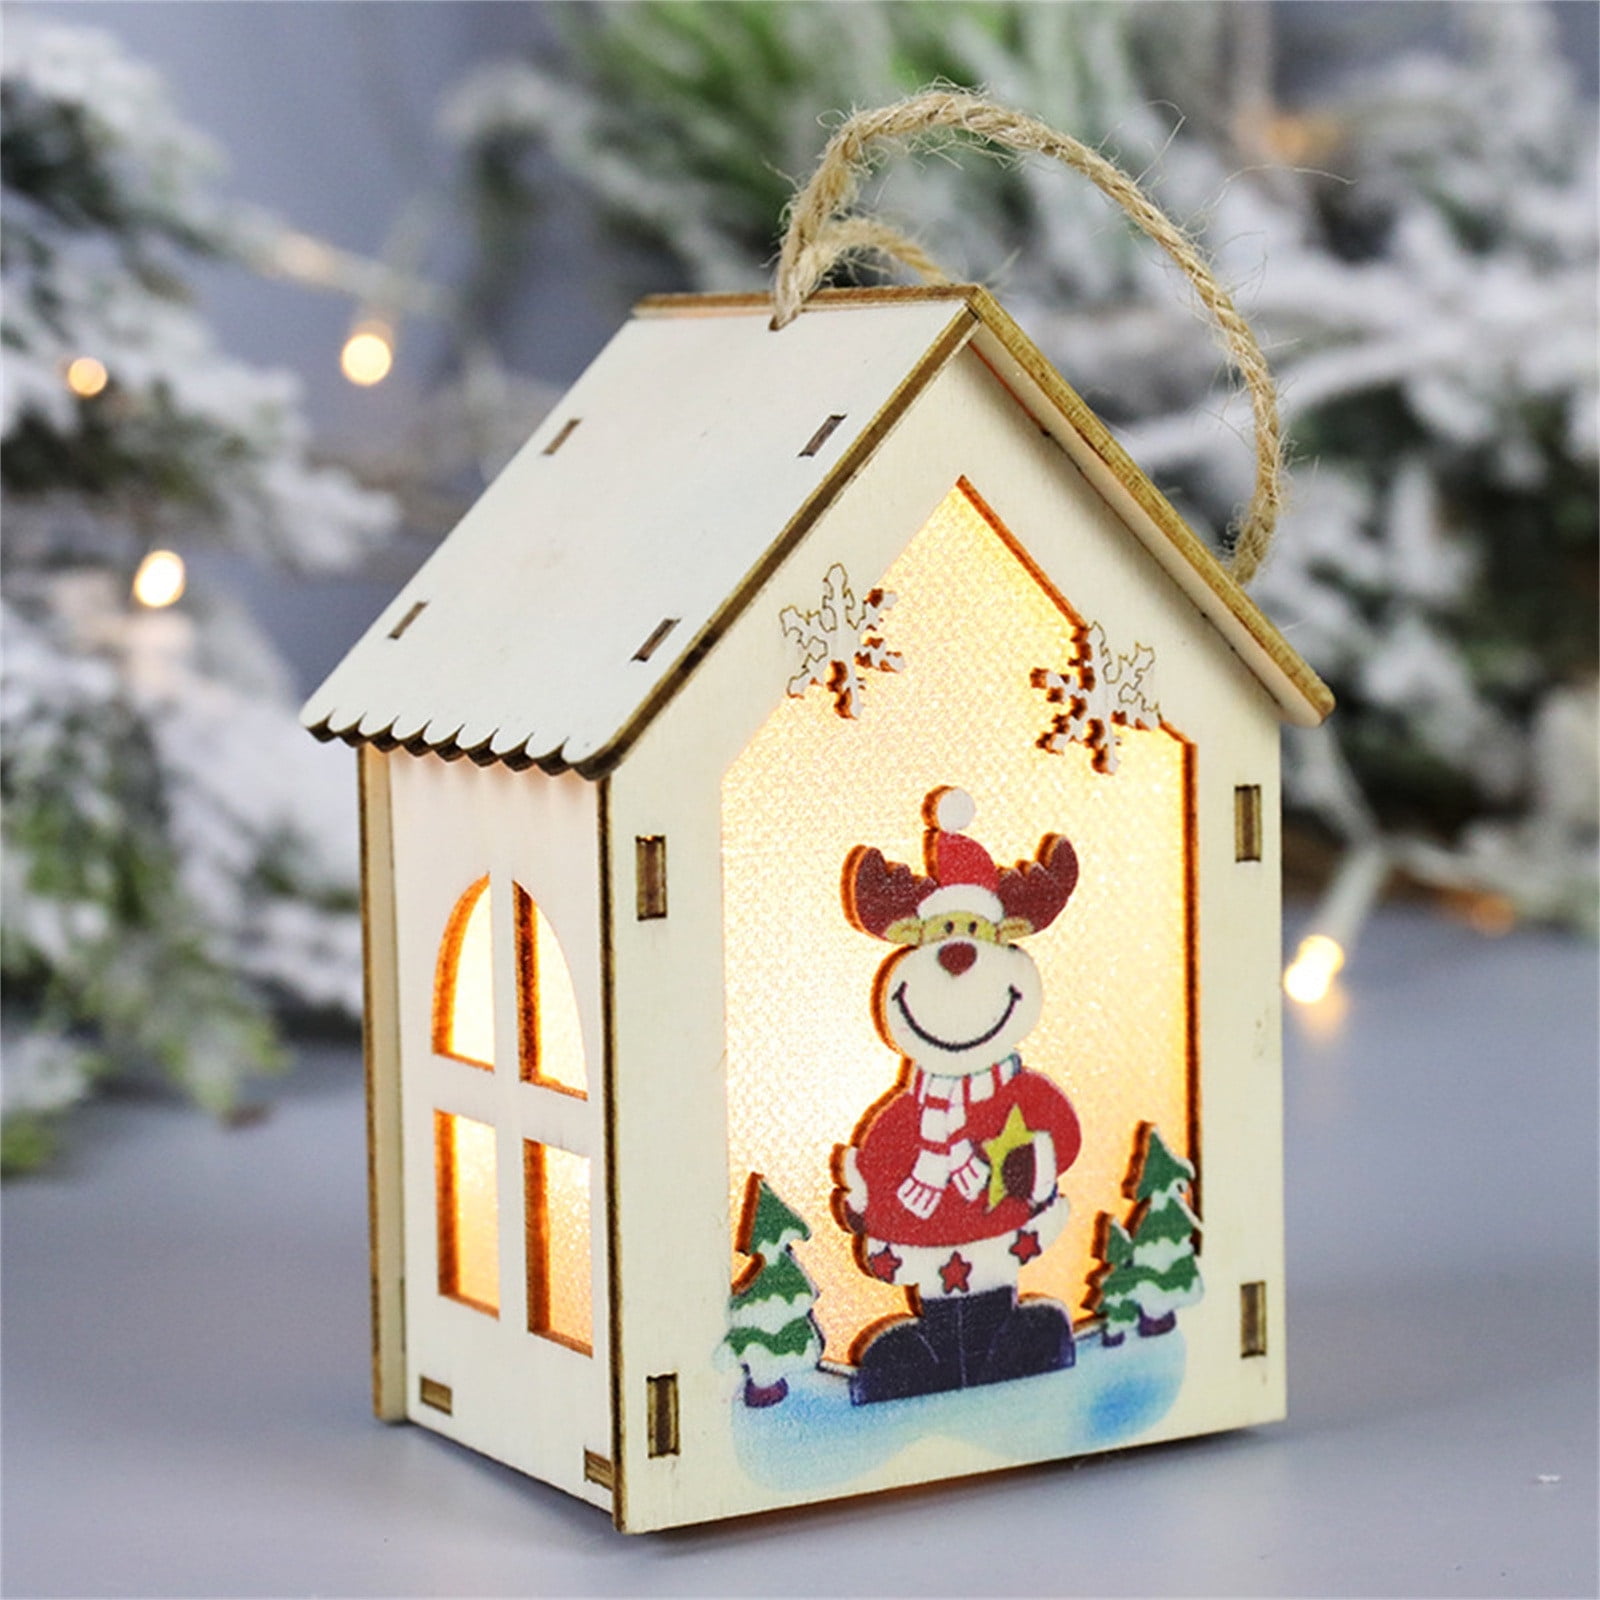 Details about   1Pc Christmas LED Wind Lamps Desktop Night Light Creative Party Ornaments 